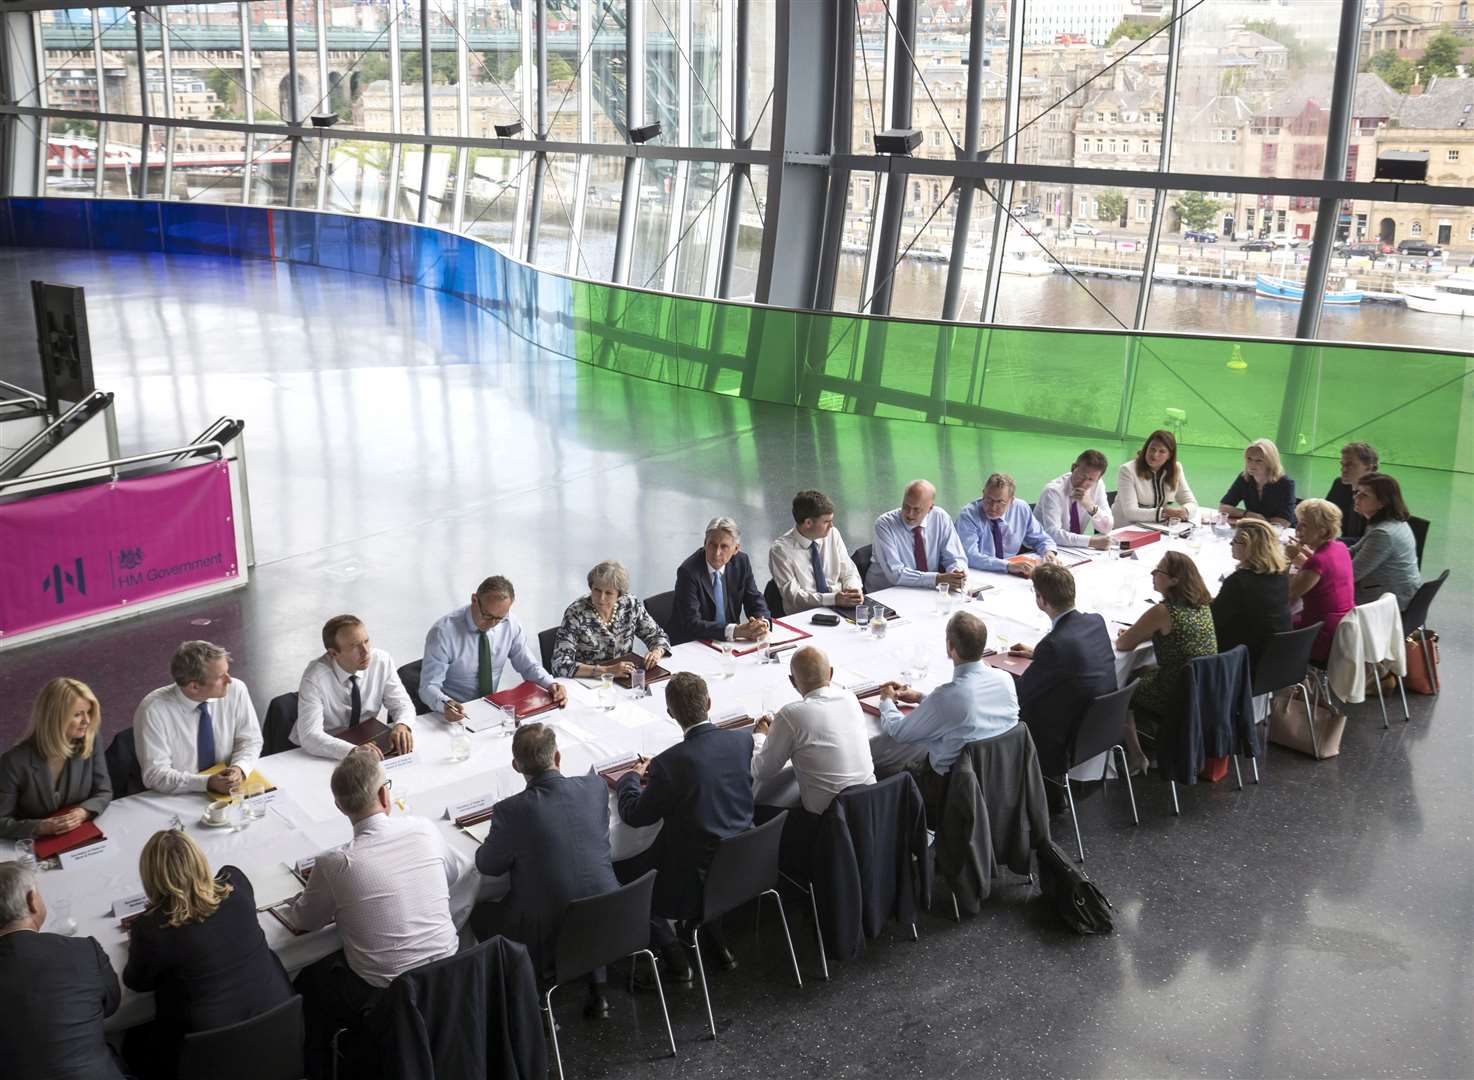 Theresa May held a cabinet meeting at the venue in 2018 (PA)